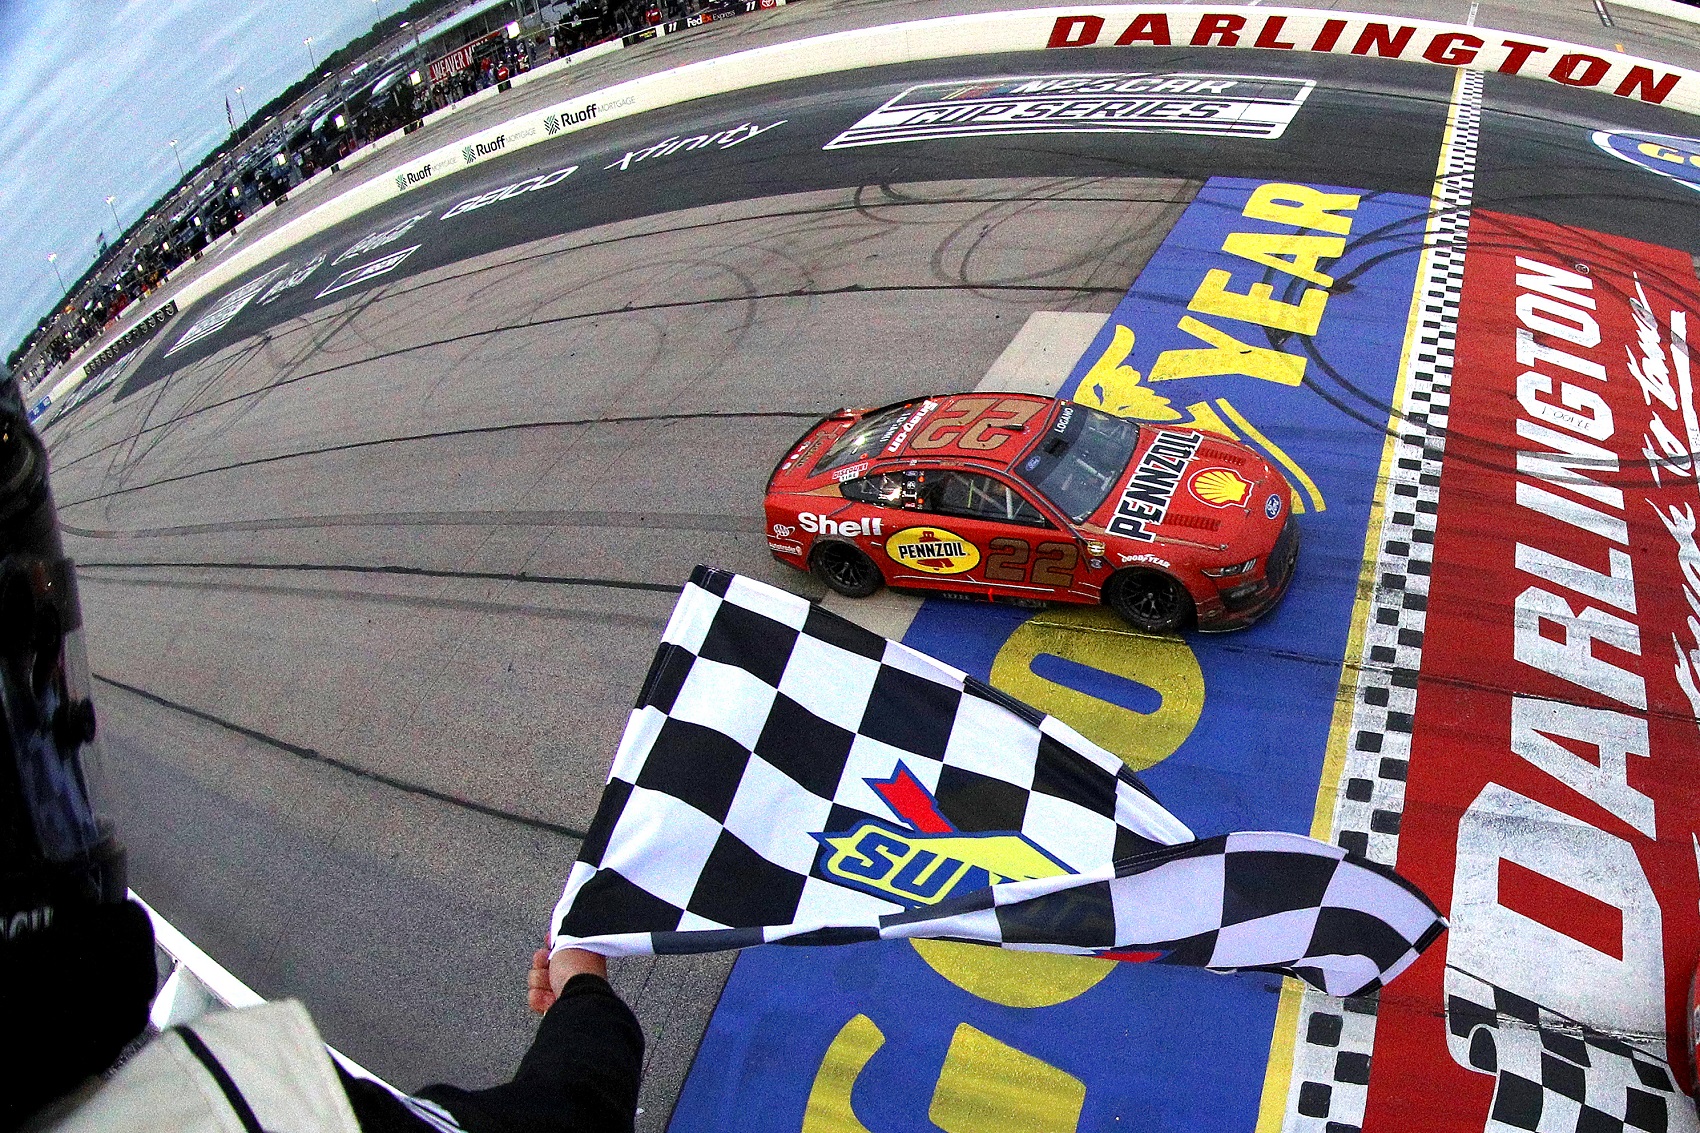 MAY 08: Joey Logano, driver of the #22 Shell Pennzoil Ford, takes the checkered flag to win the NASCAR Cup Series Goodyear 400 at Darlington Raceway on May 08, 2022 in Darlington, South Carolina.